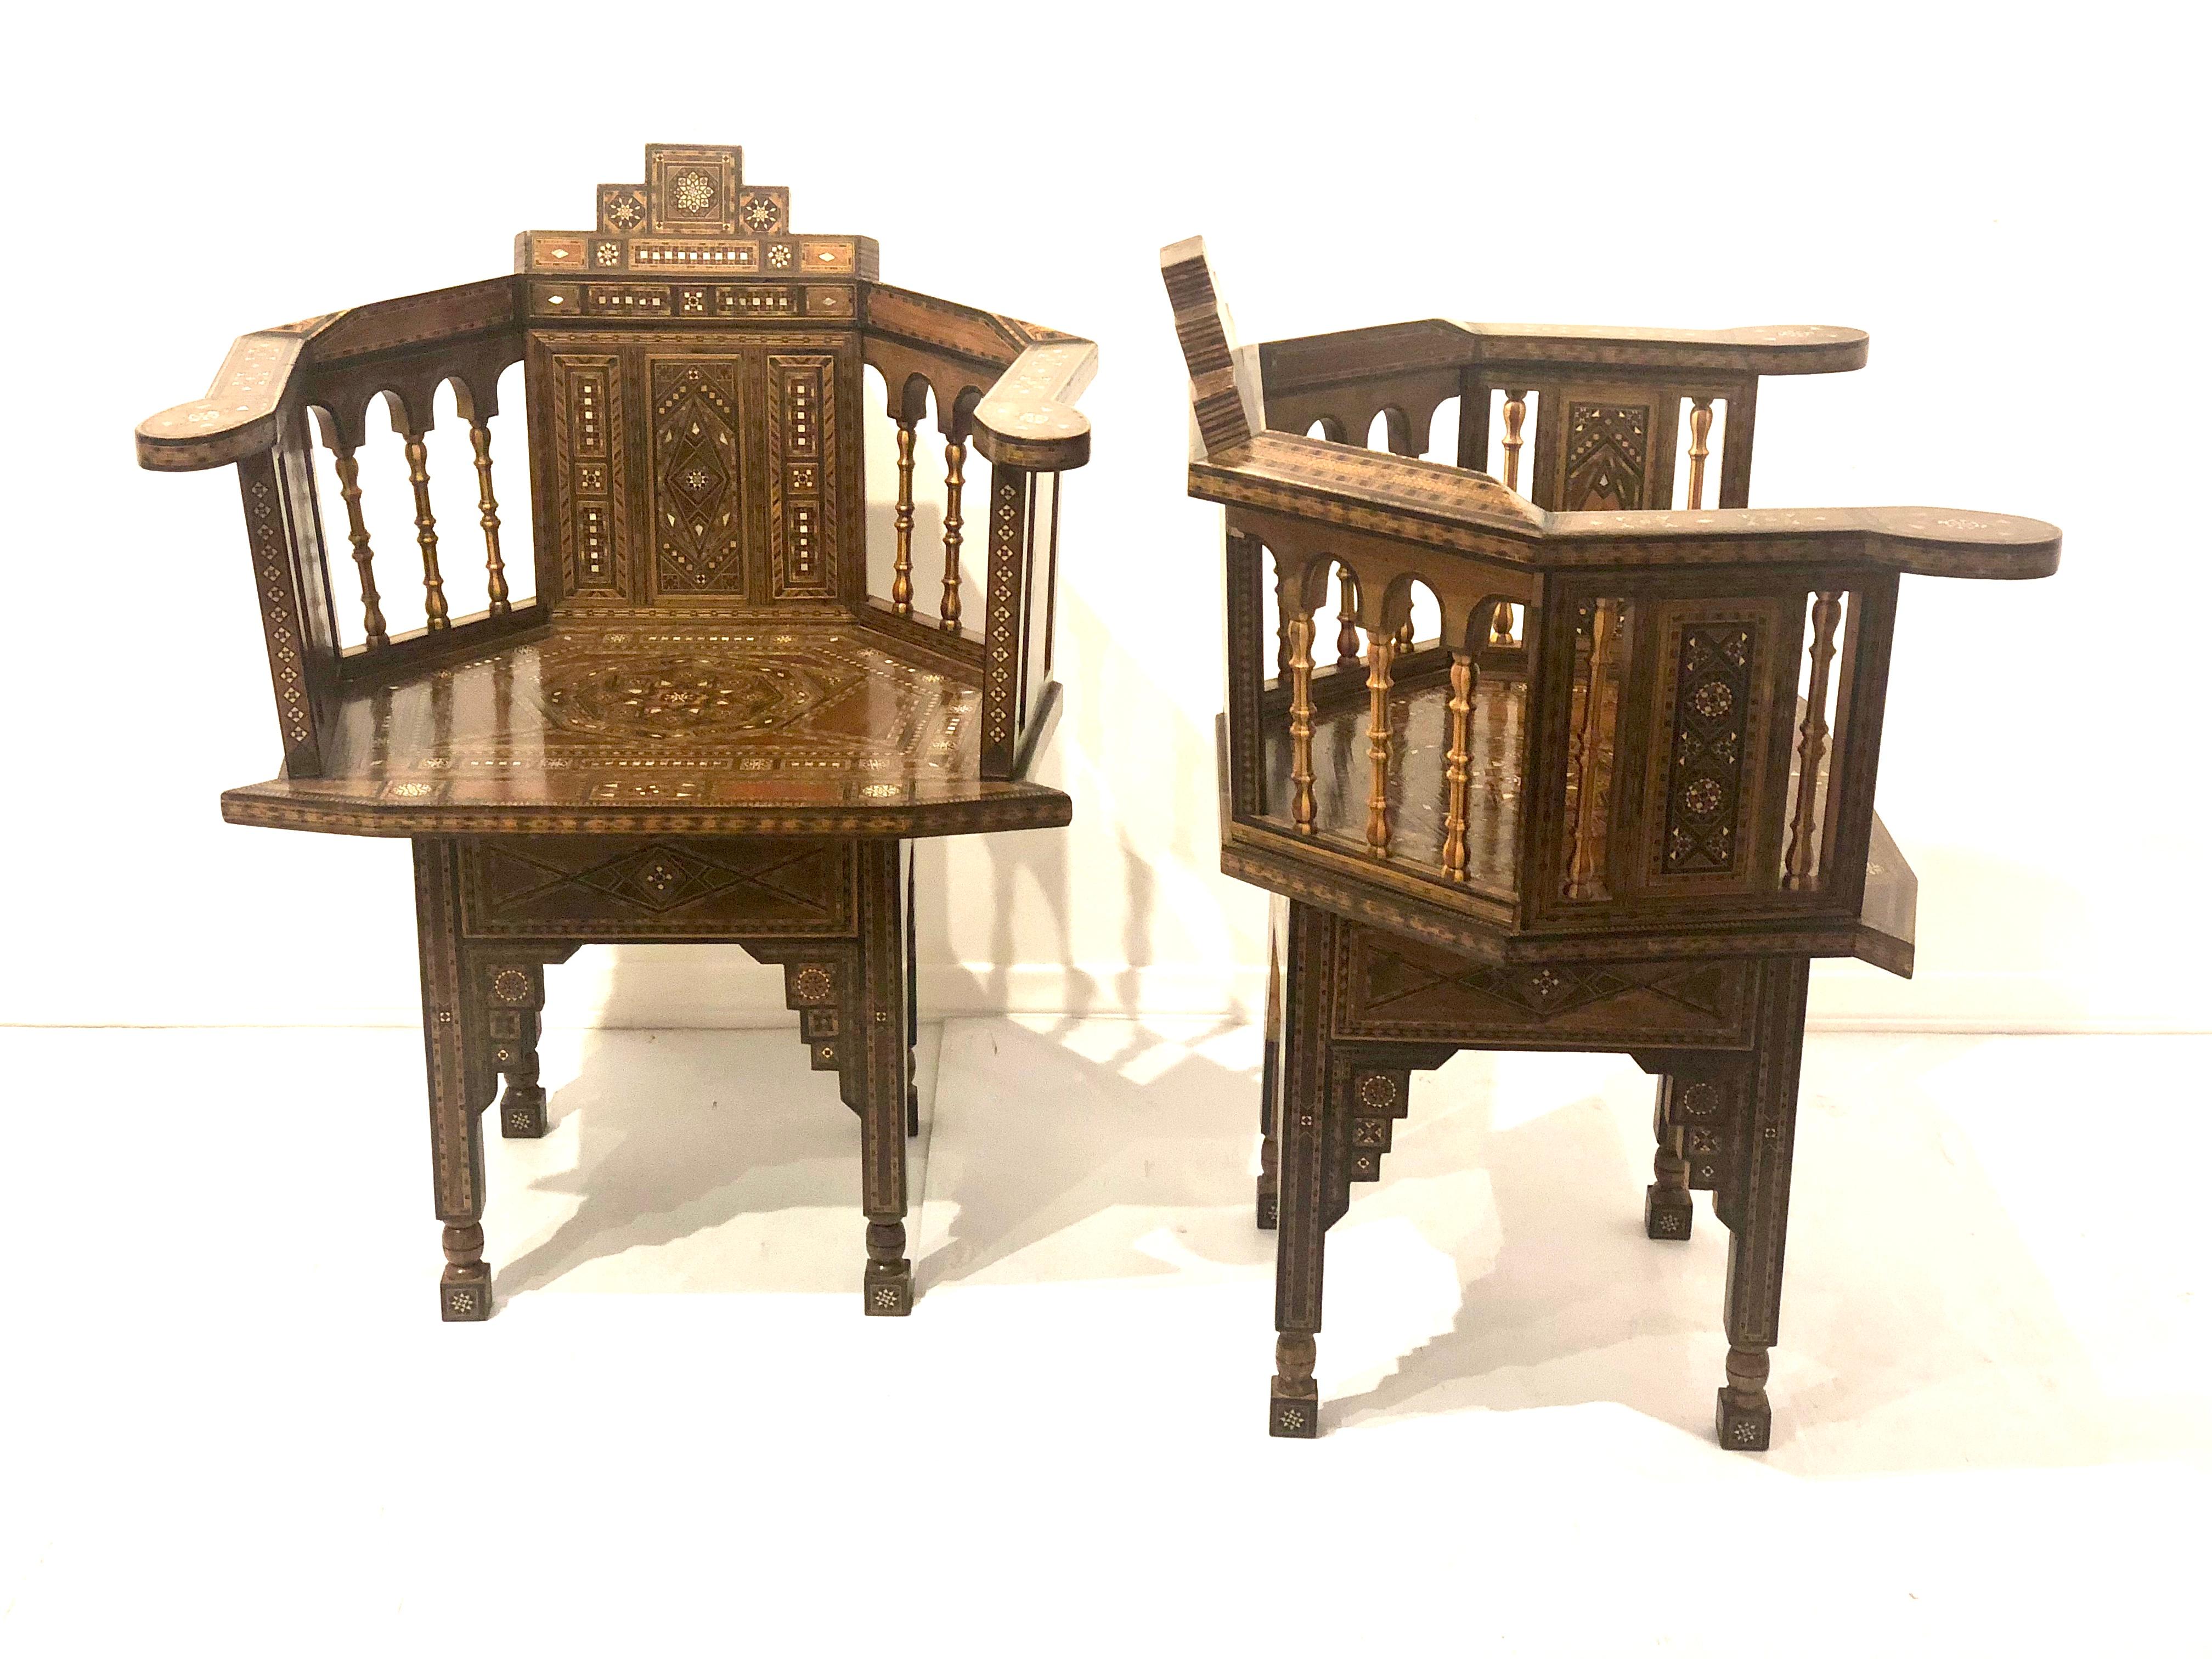 A pair of Syrian barrel back chairs with geometric lines and exotic wood inlays with mother of pearl detail. Sometimes referred to as Moroccan. We think these pair its early 20th century with a mix of woods, these chairs are impressive and a piece